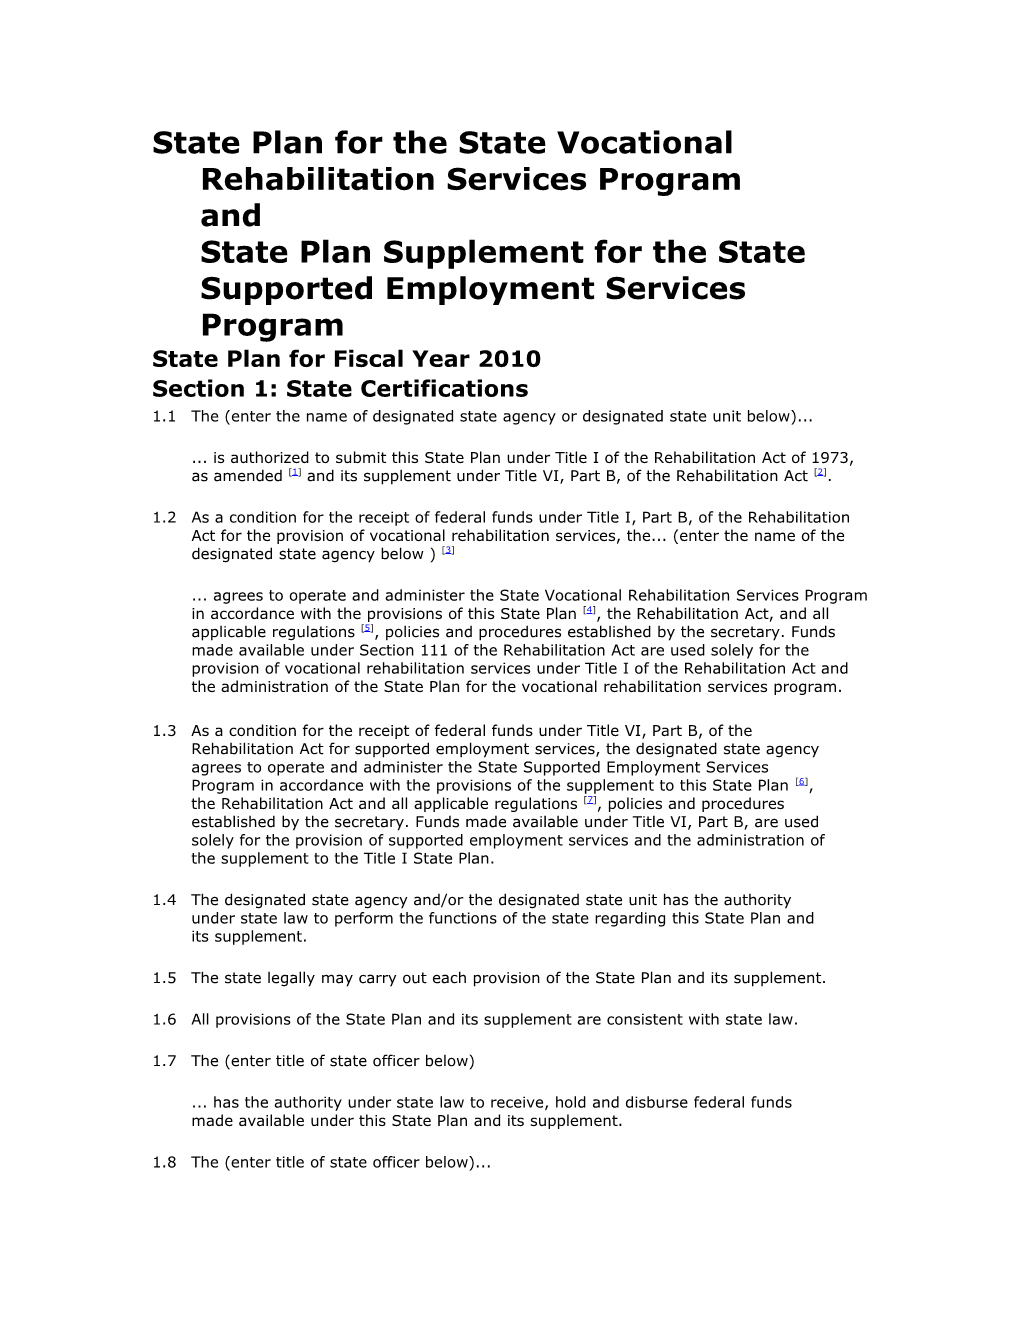 Preprint for State Plan for Vocational Rehabilitation Services and the State Plan Supplement